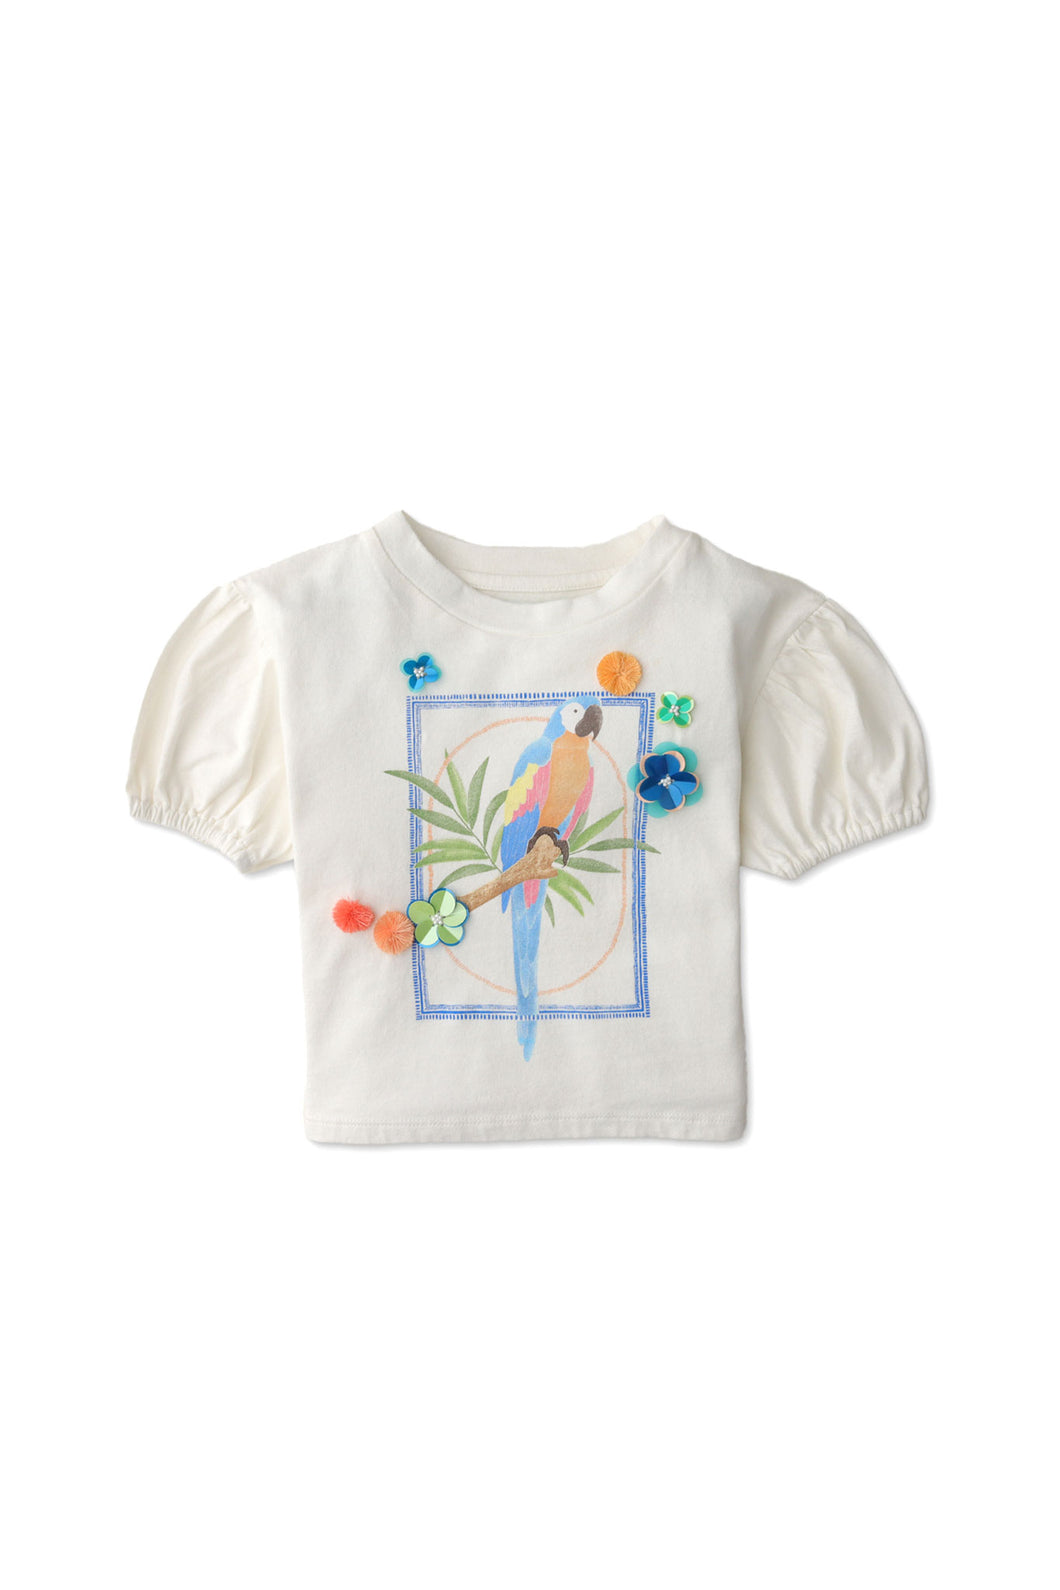 Gingersnaps Parrot Print Tee W/ Floral Sequin Embellishments